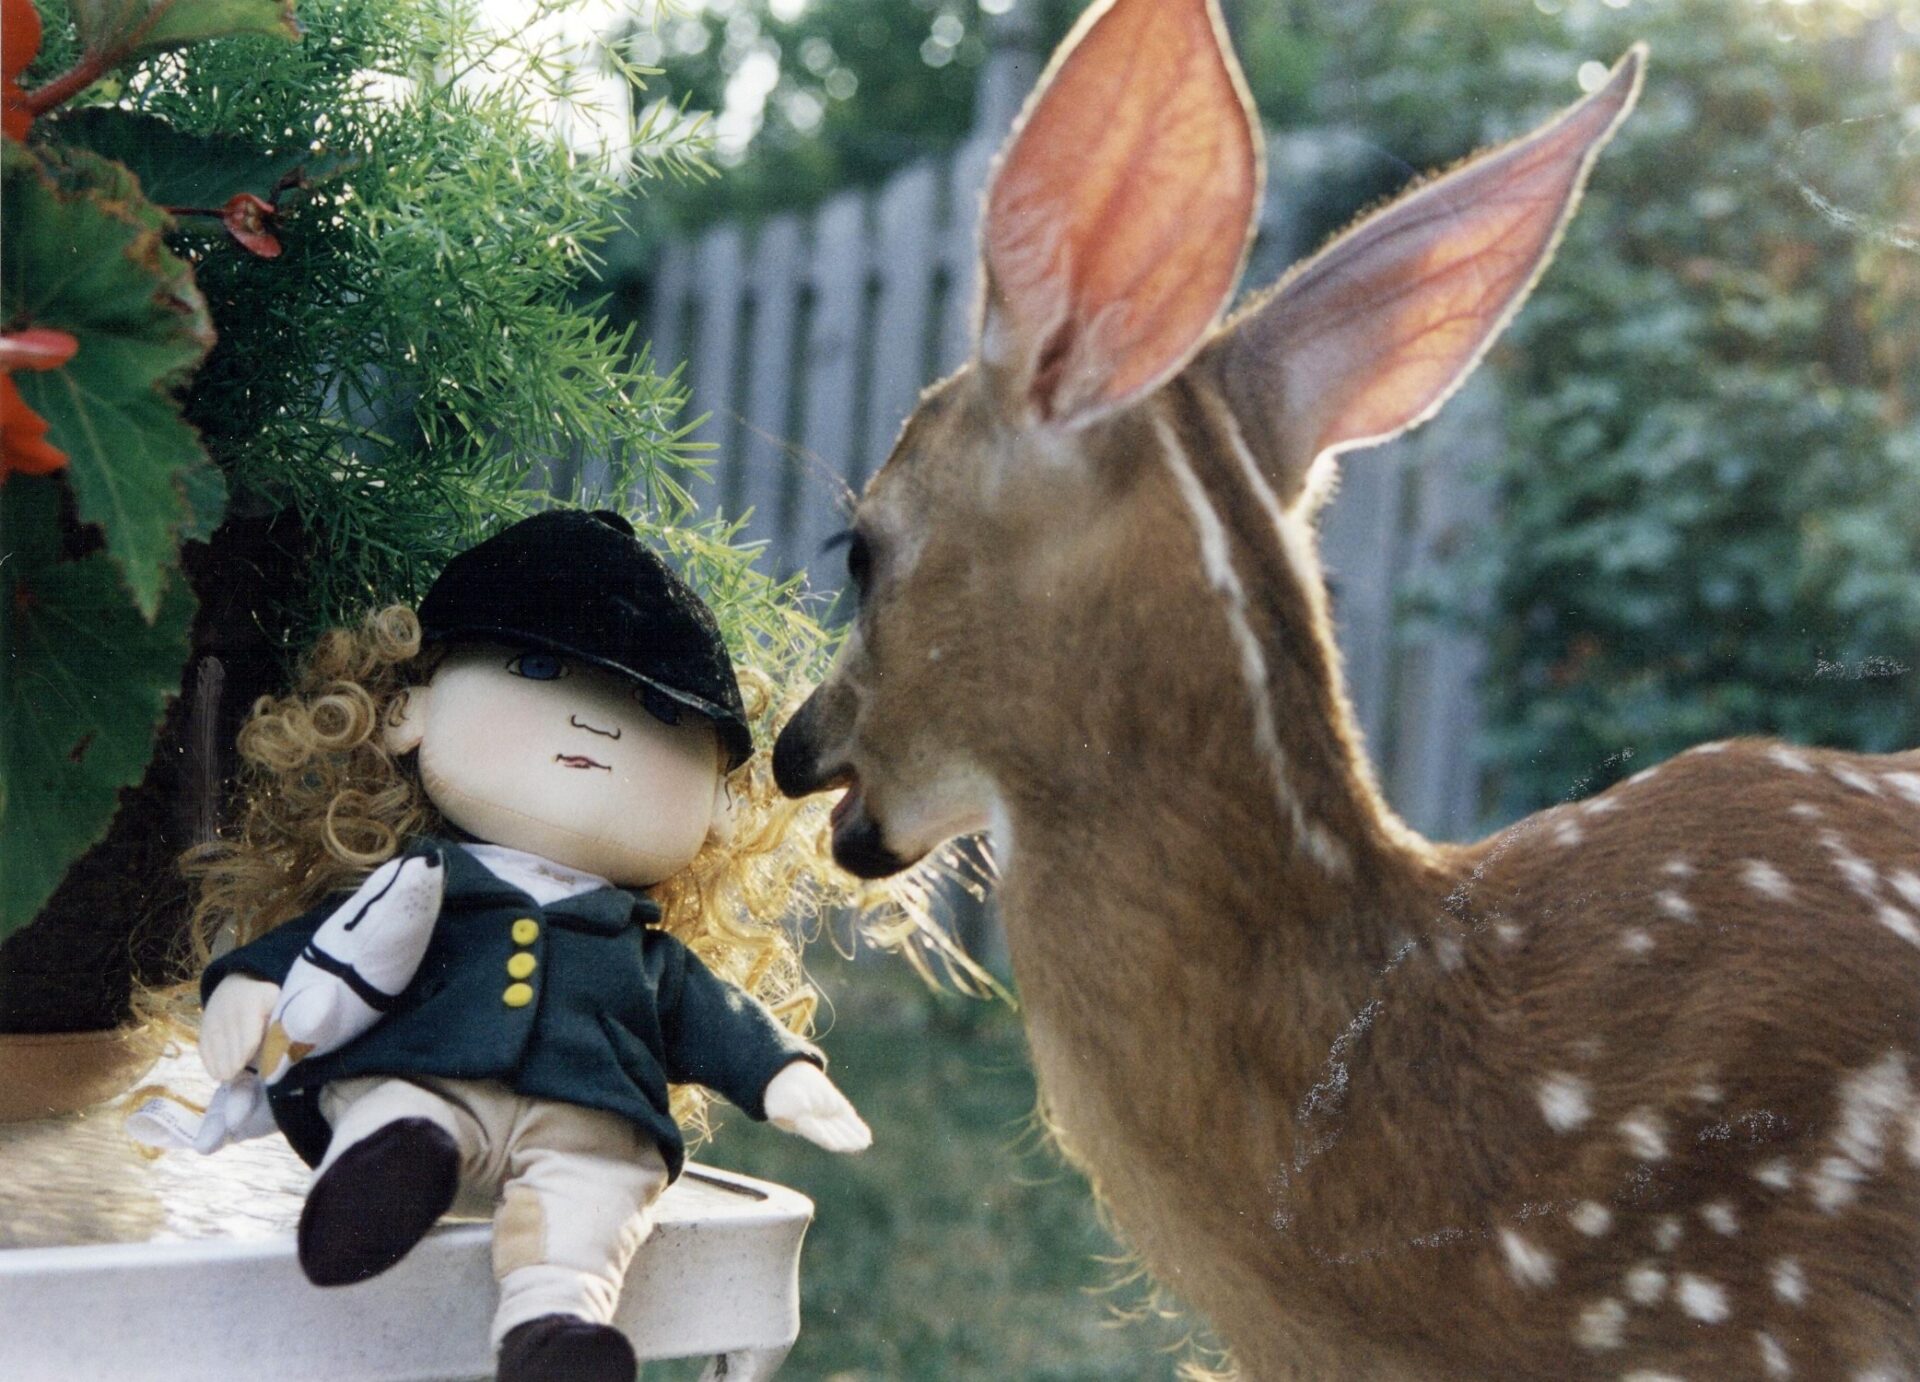 A deer looking at a doll